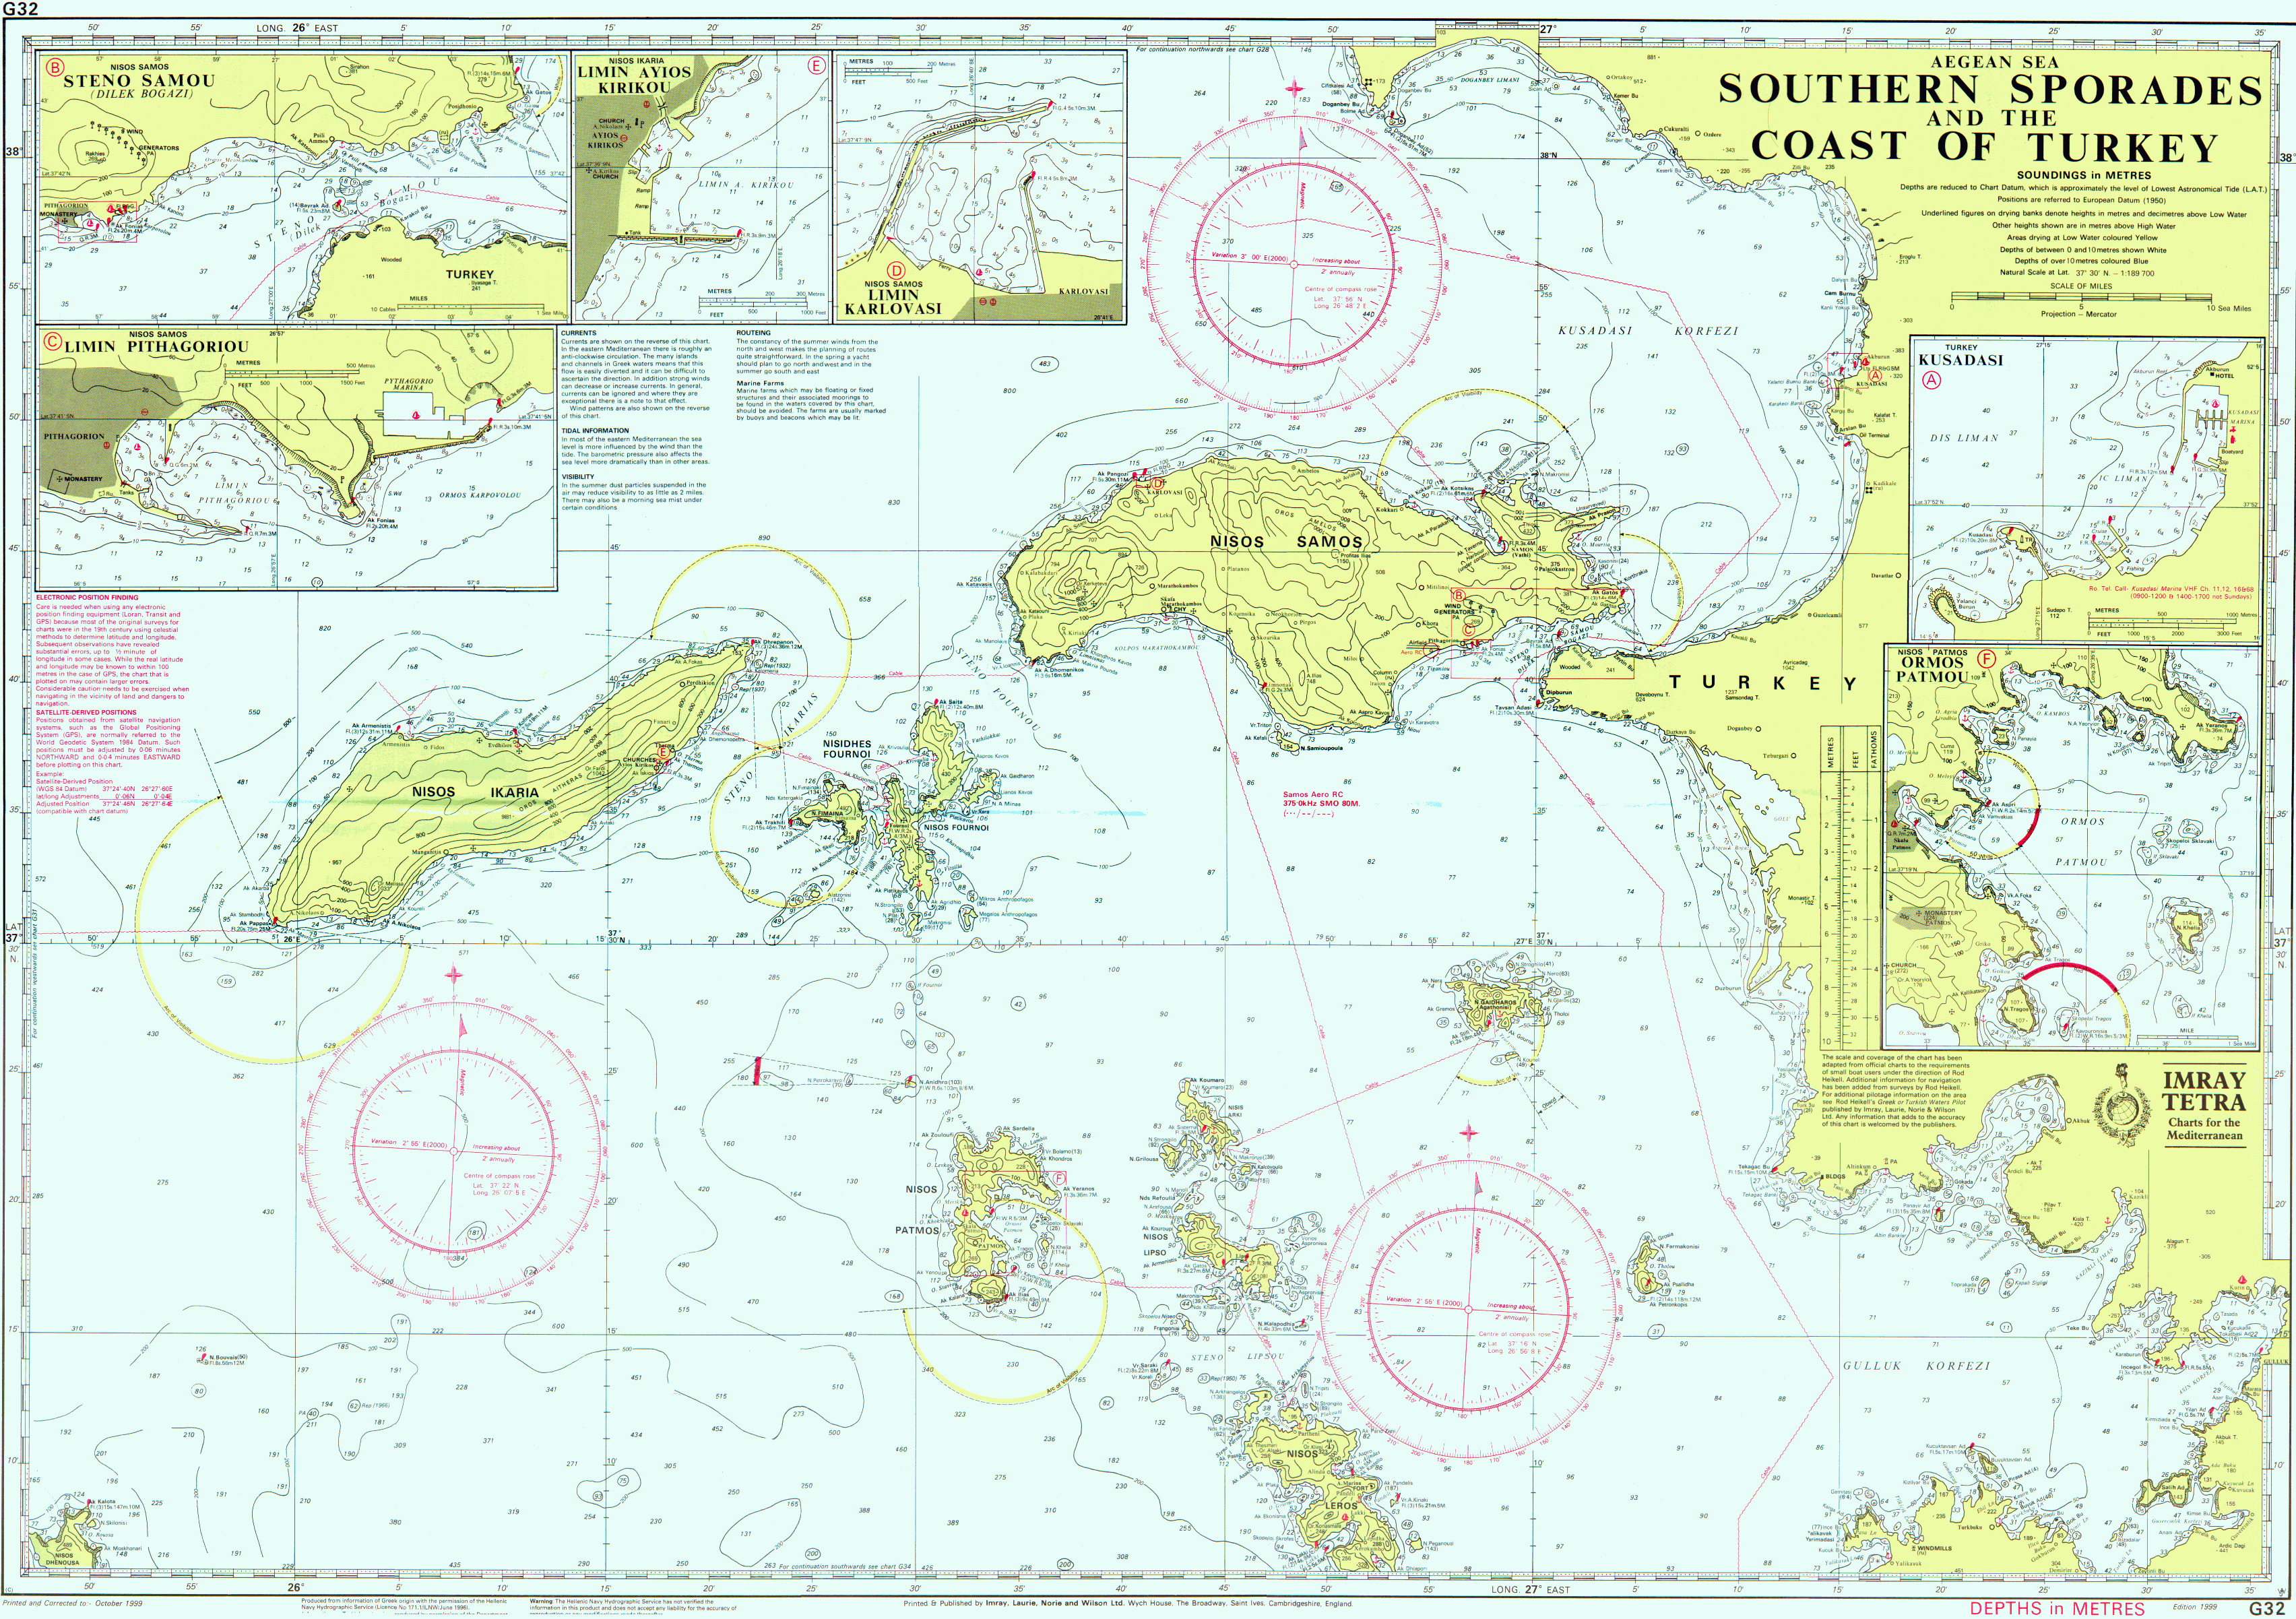 nautical chart of southern sporades and Turkey